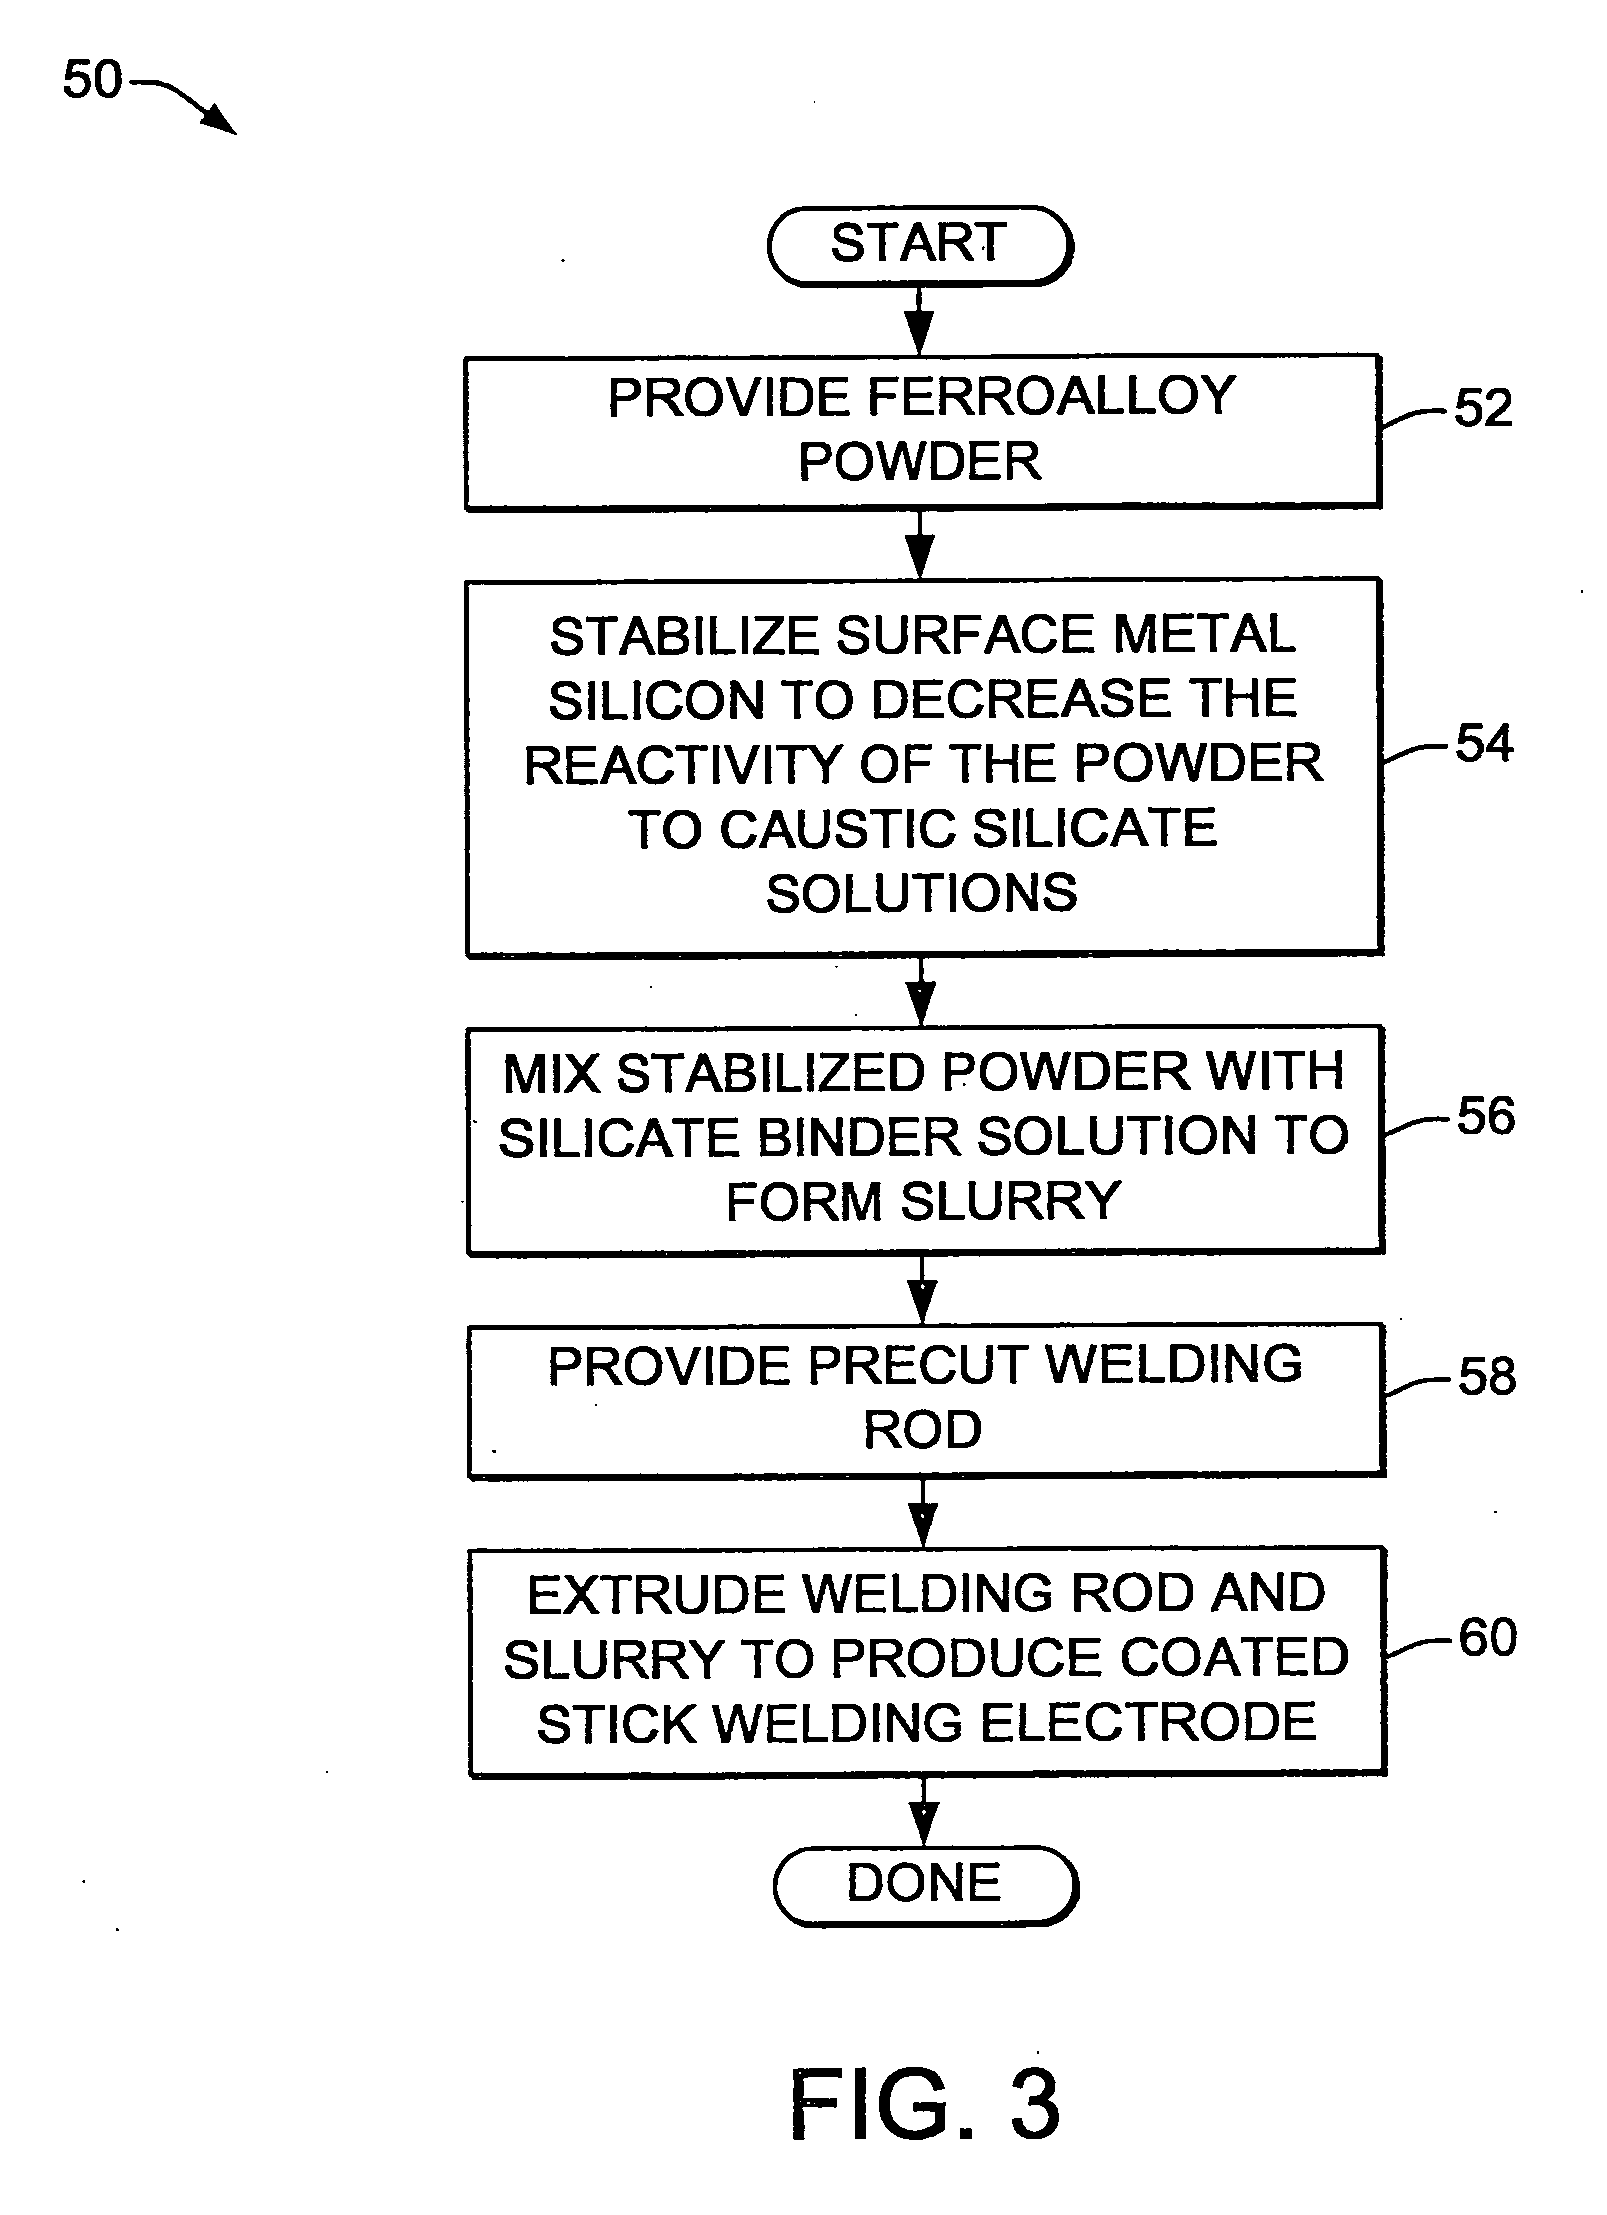 Method for reducing reactivity of ferroalloys used in fabricating coated stick welding electrodes